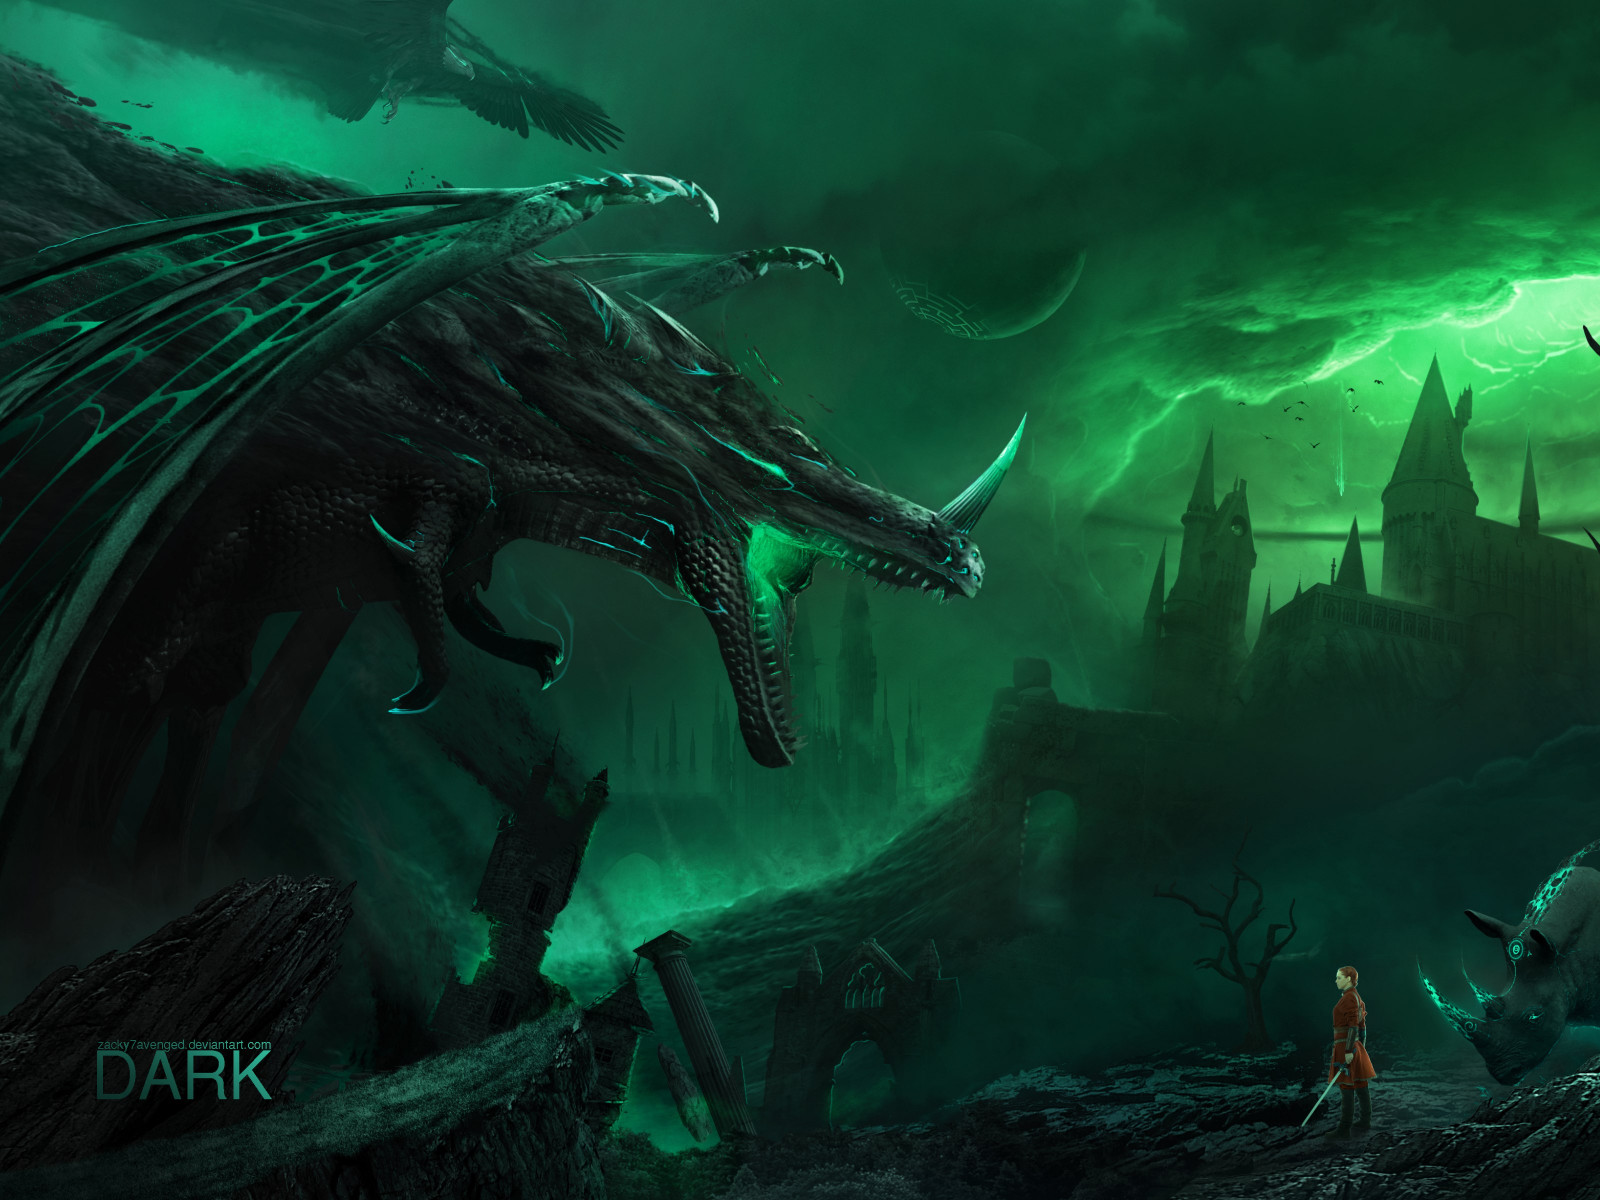 The dark creatures are coming wallpaper 1600x1200